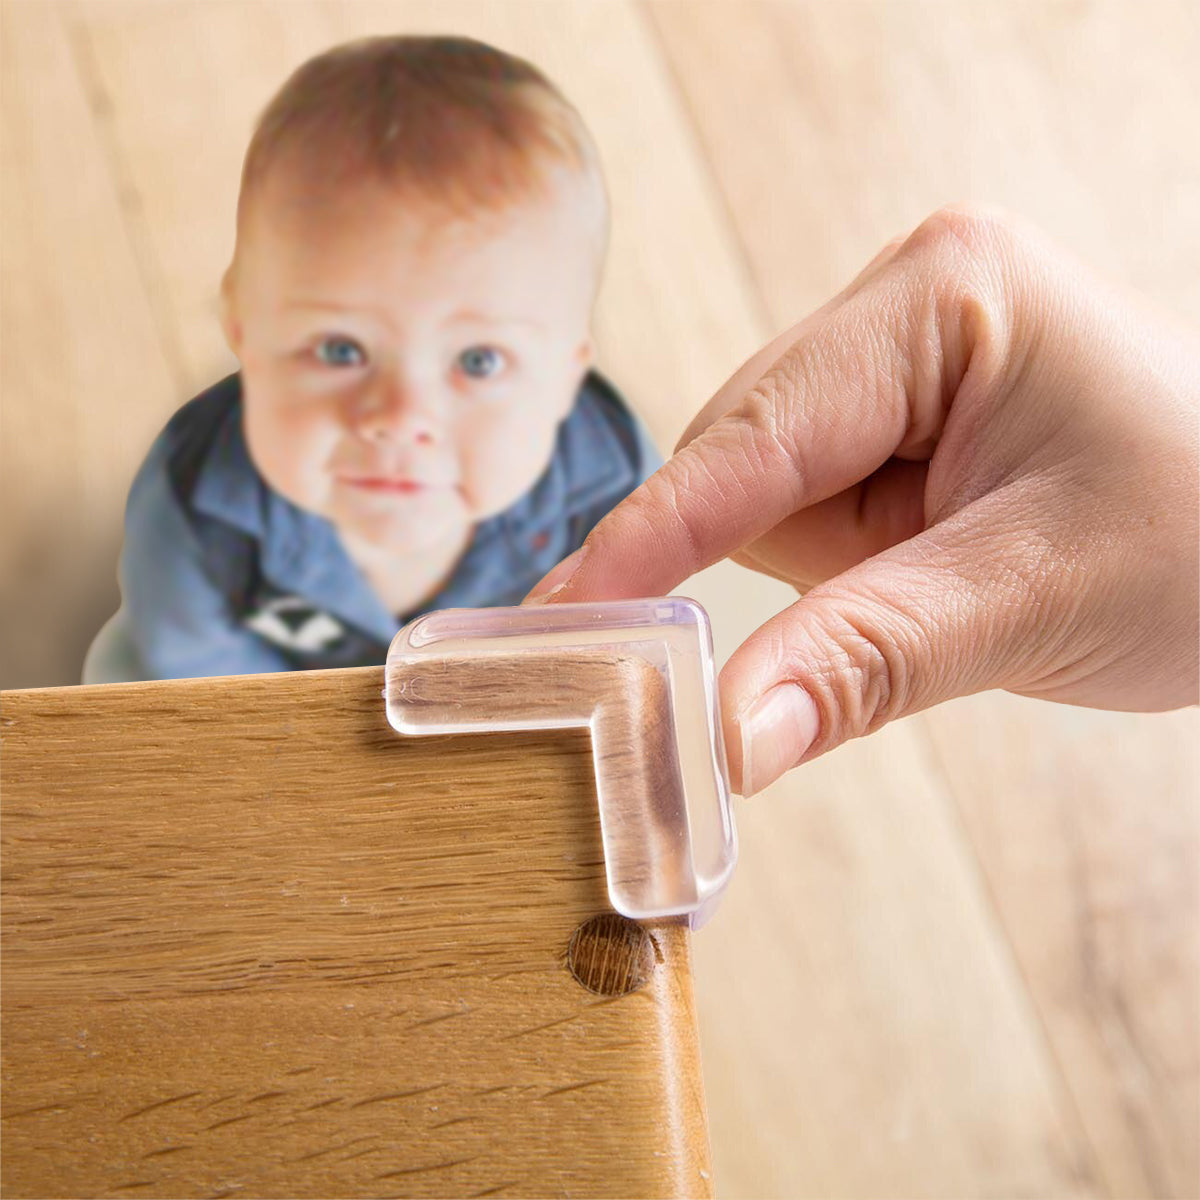 Corner Guard, Smart Babyproofing Products